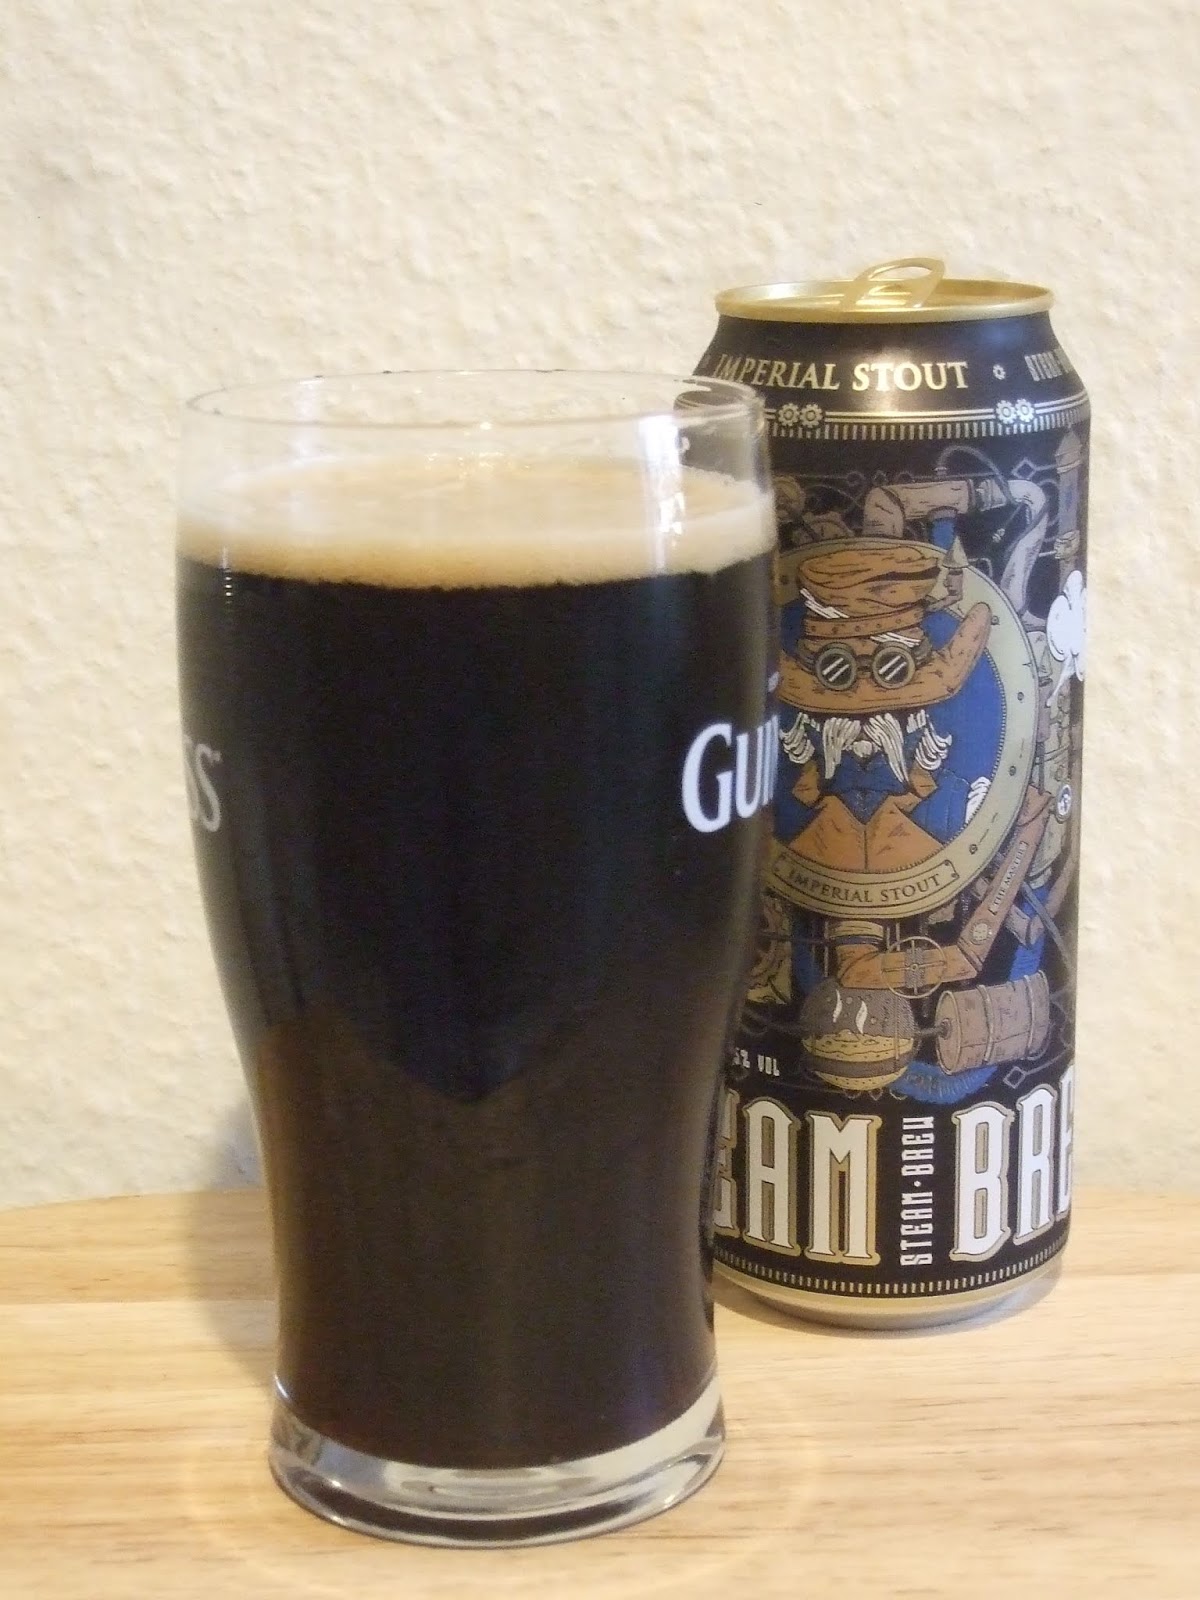 Steam brew imperial stout in can фото 75